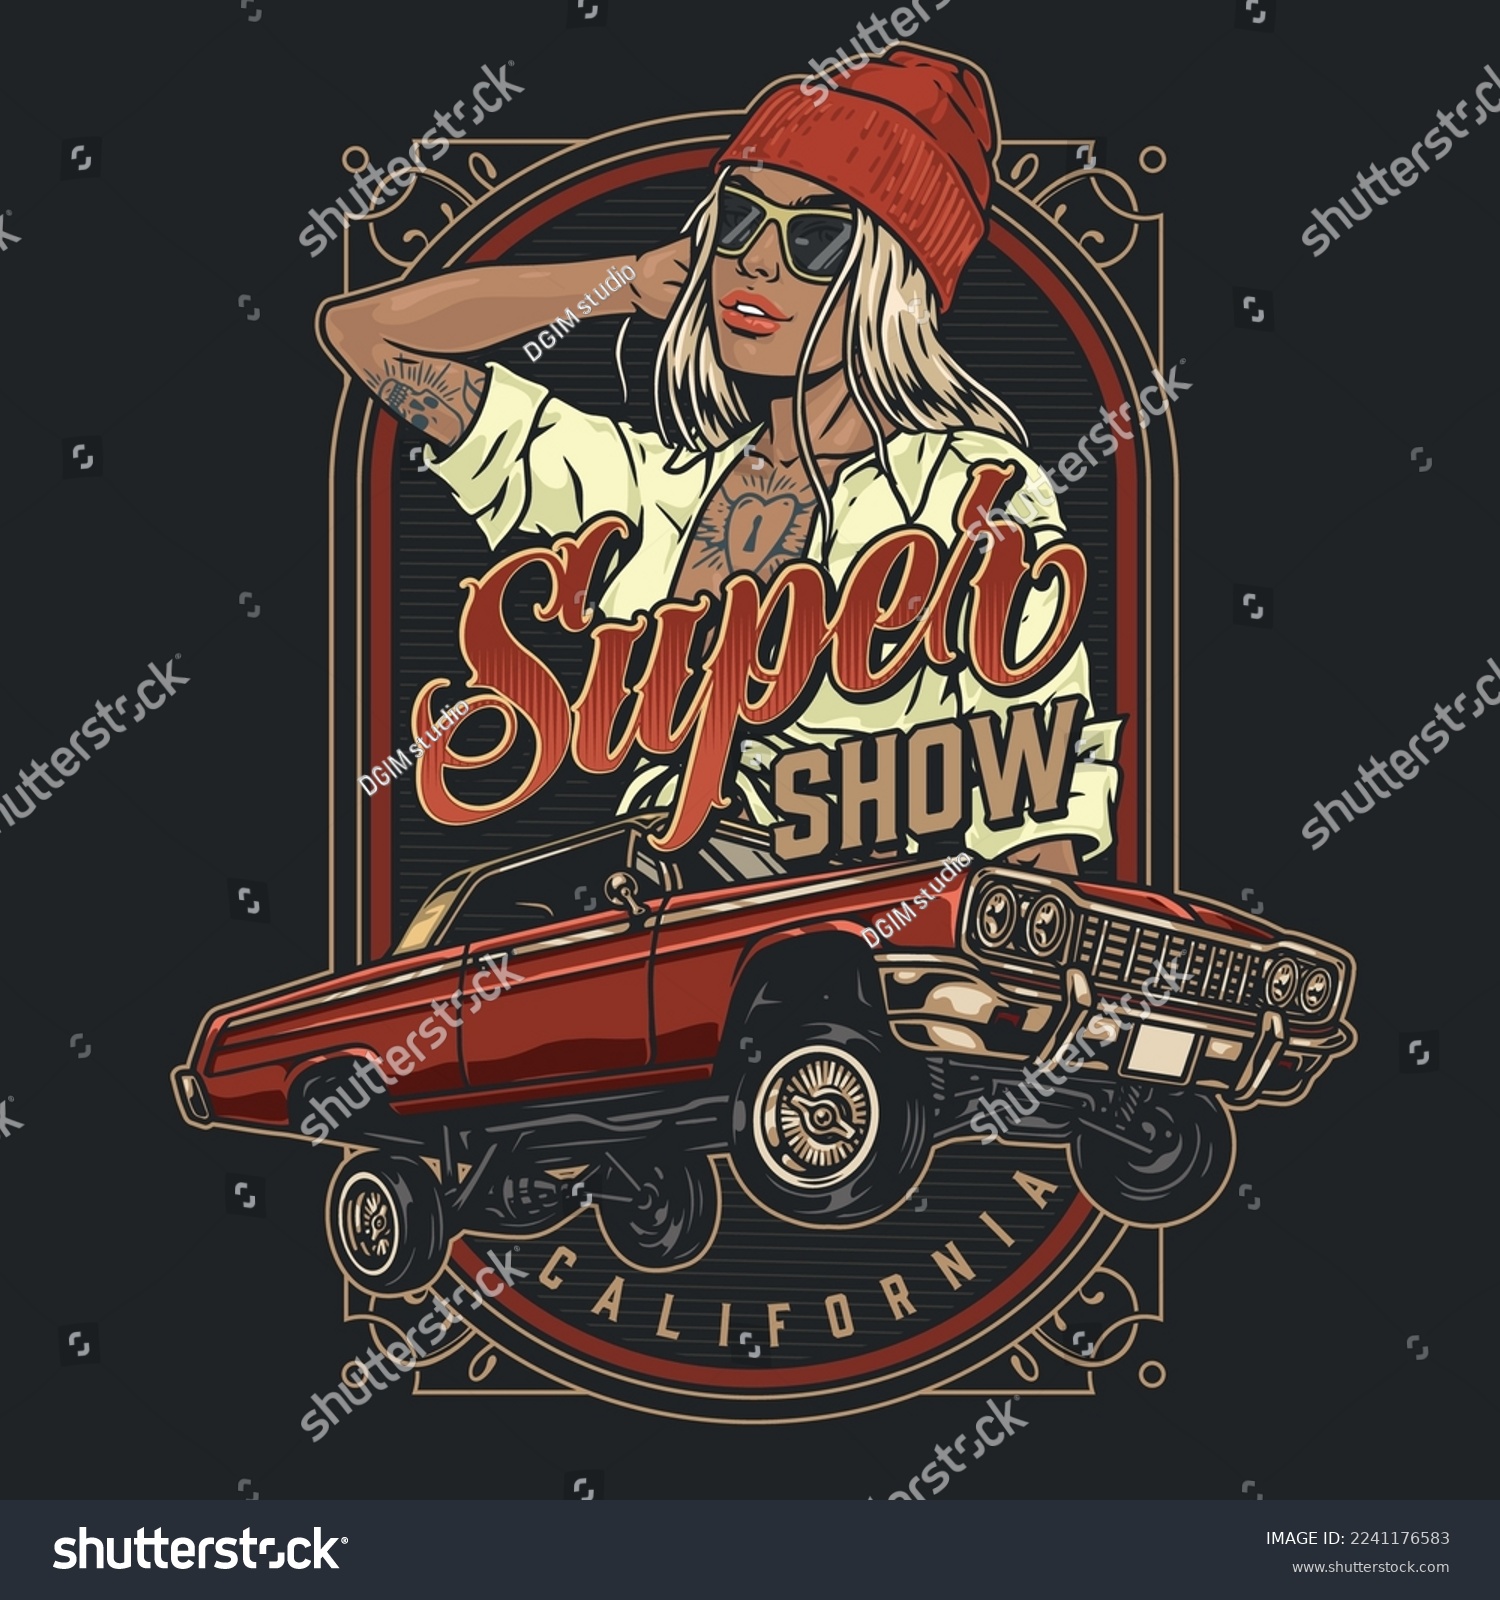 SVG of California lowriding show colorful poster with vintage car with hydraulic jump wheels and beautiful street racer girl vector illustration svg